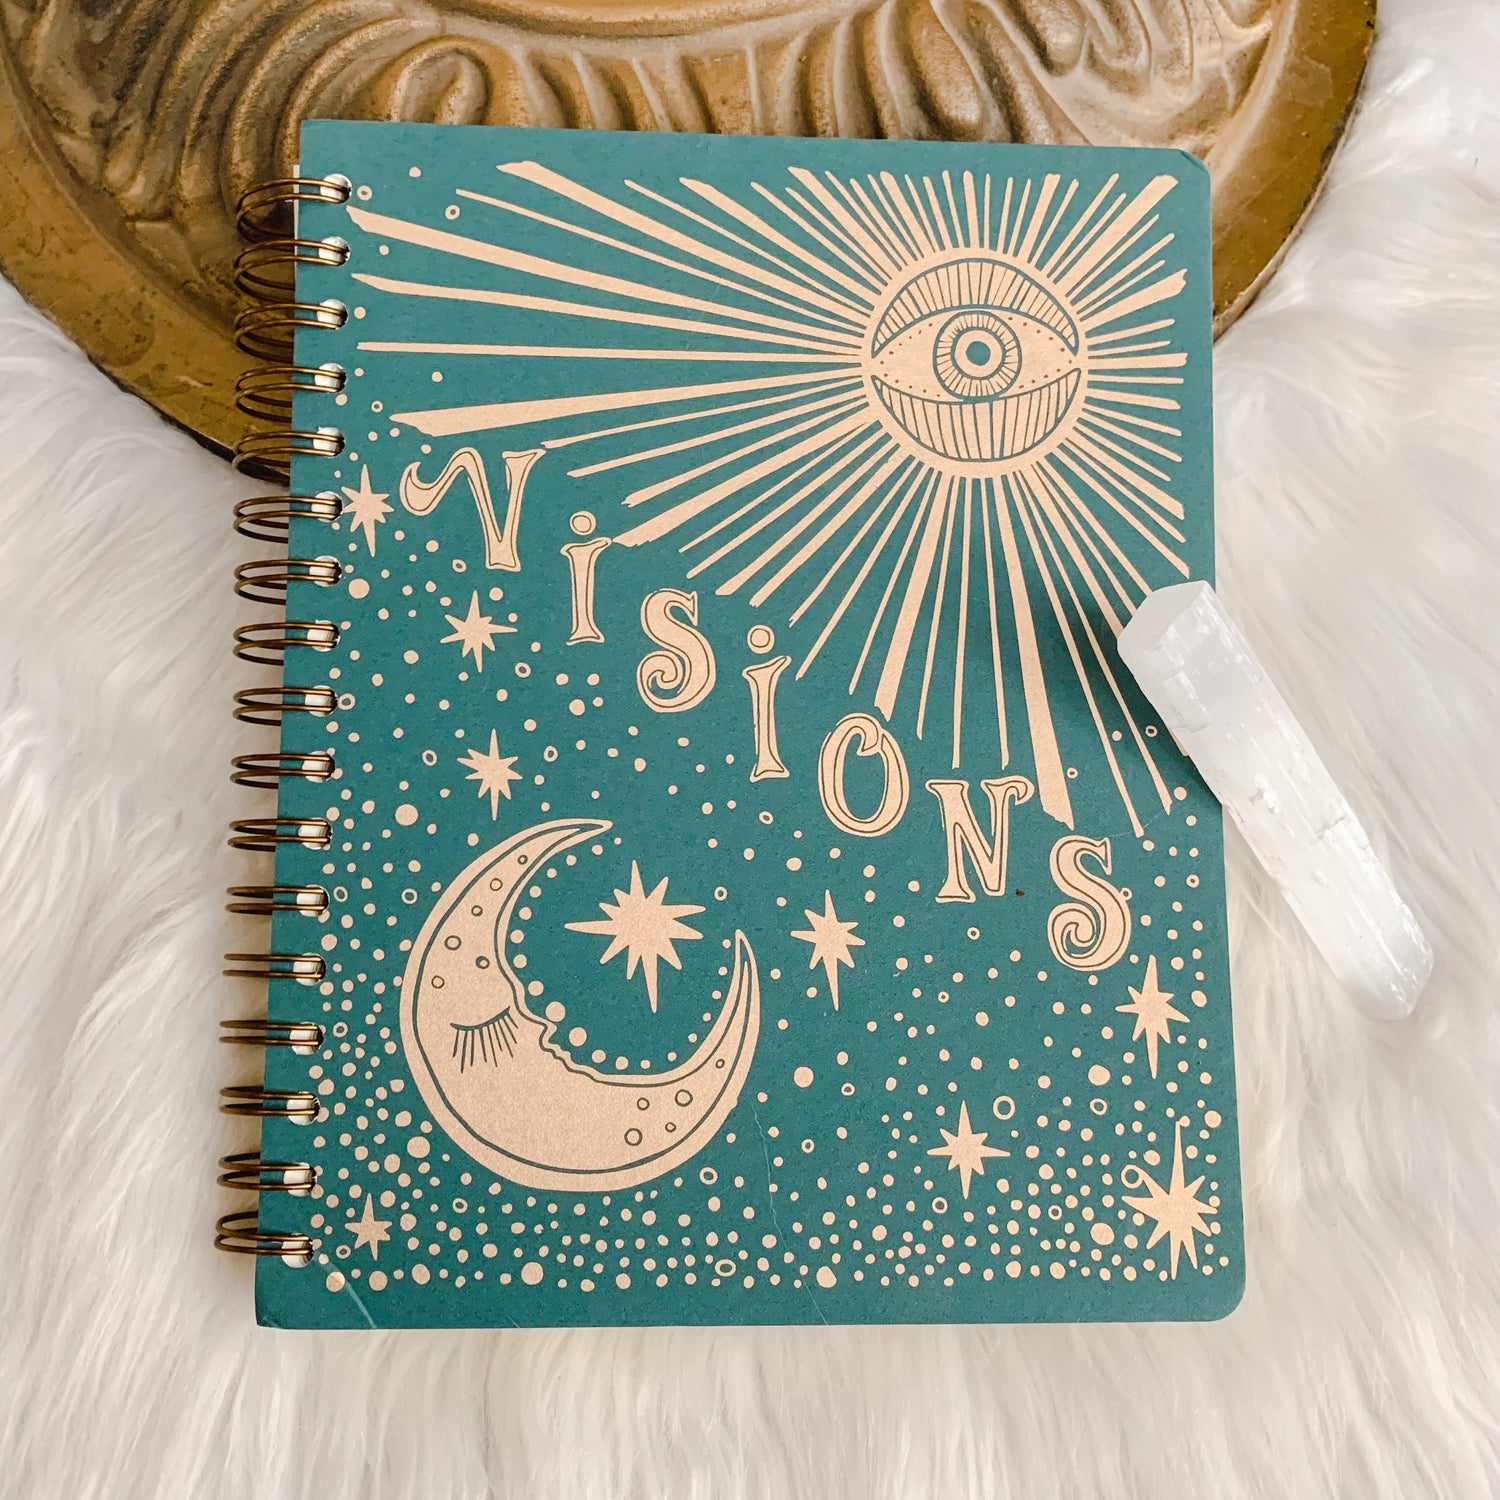 visions-journal-green-rainbow-vision-notebook